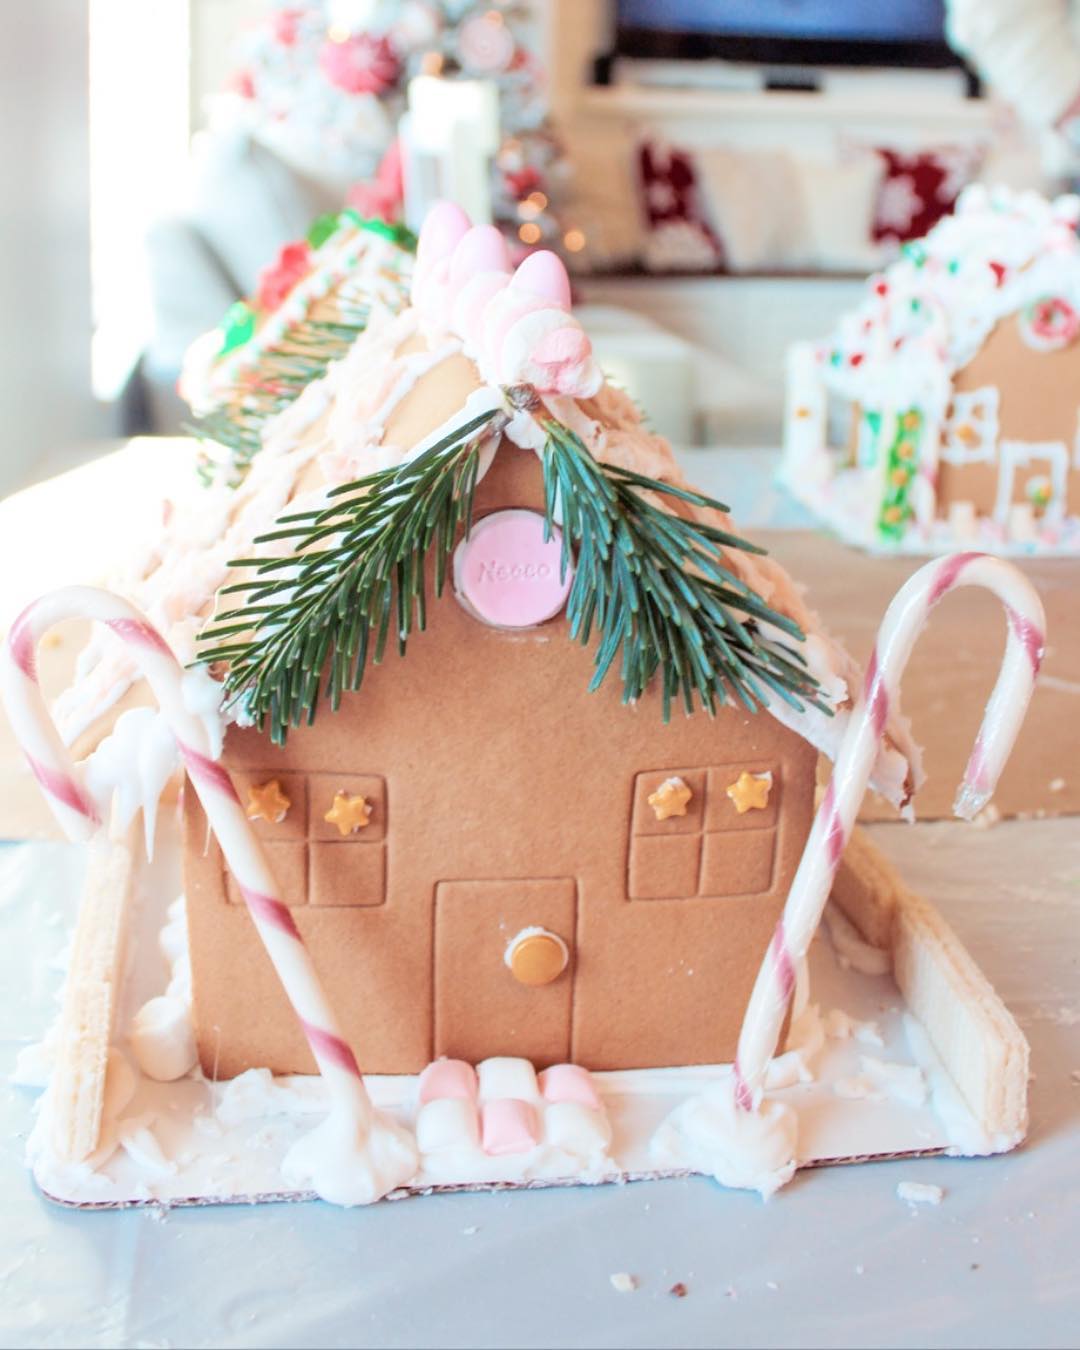 Candy gingerbread houses. Photo by Instagram user @megan.the.vegan.mom